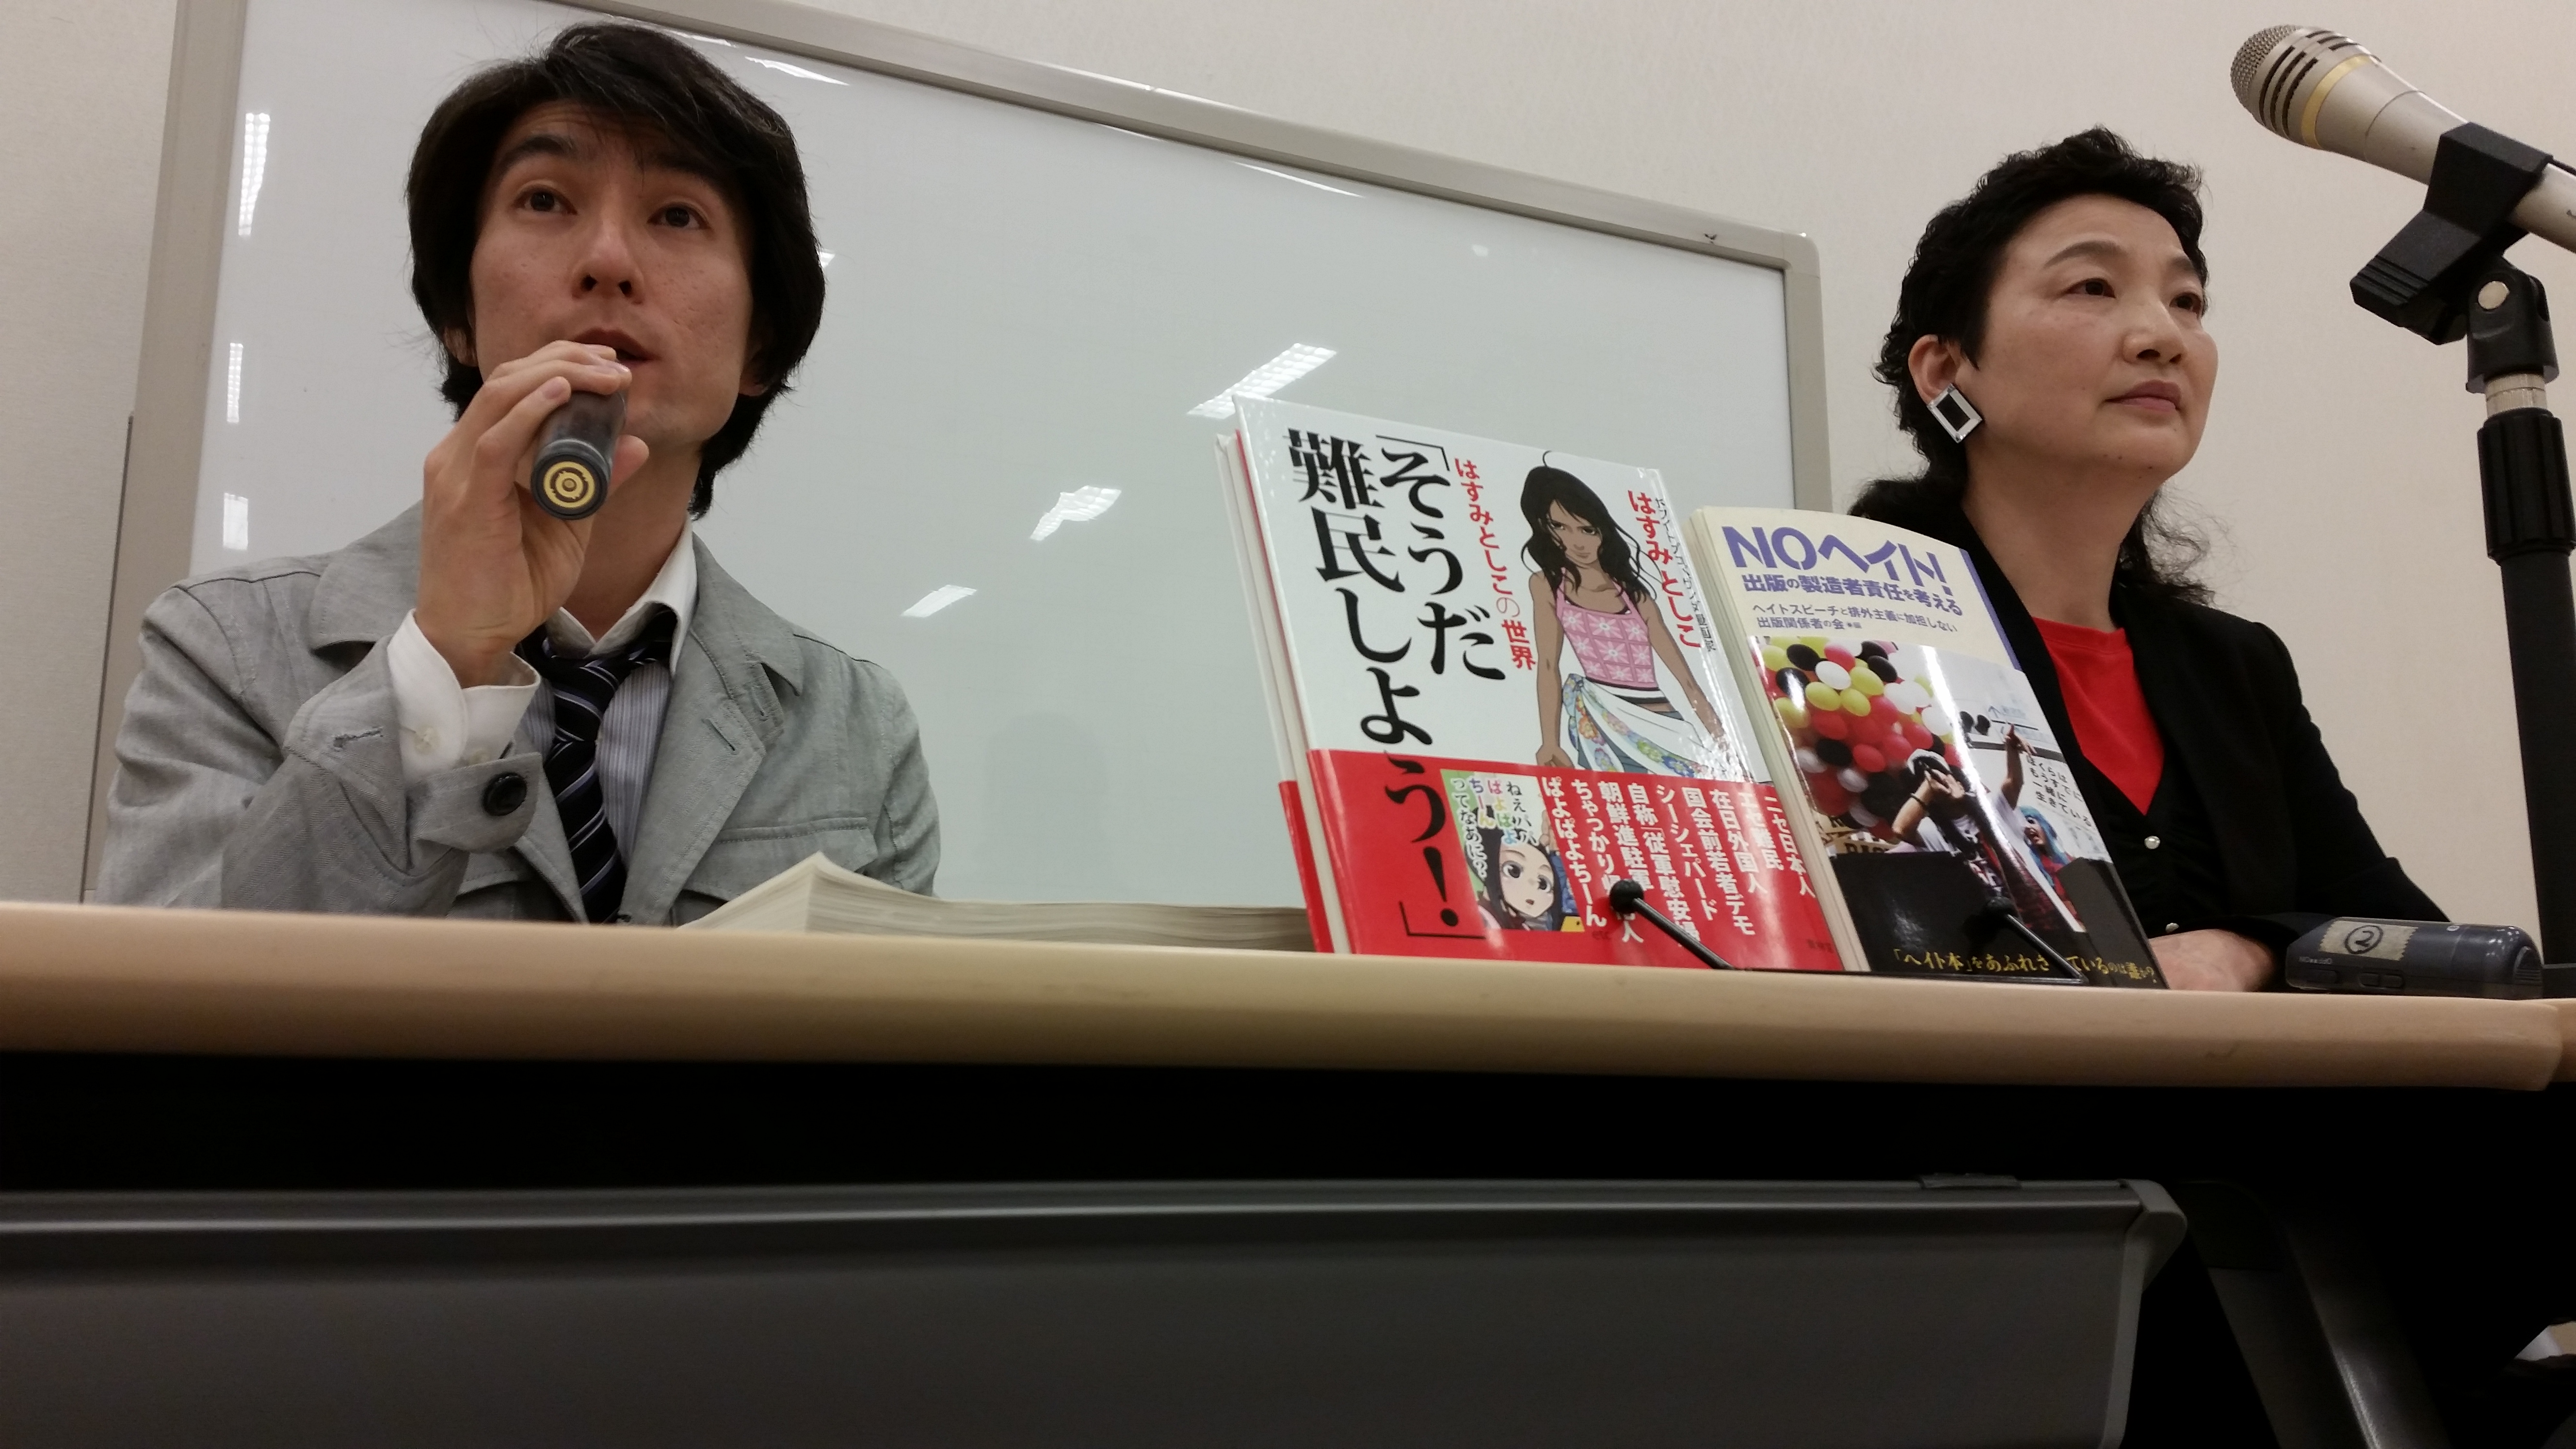 Anti-racism campaigners Yu Iwashita (left) and Shin Sugok protest the release of a book compiling what they called 'racist' cartoons drawn by artist Toshiko Hasumi during a news conference in Tokyo on Monday. | TOMOHIRO OSAKI